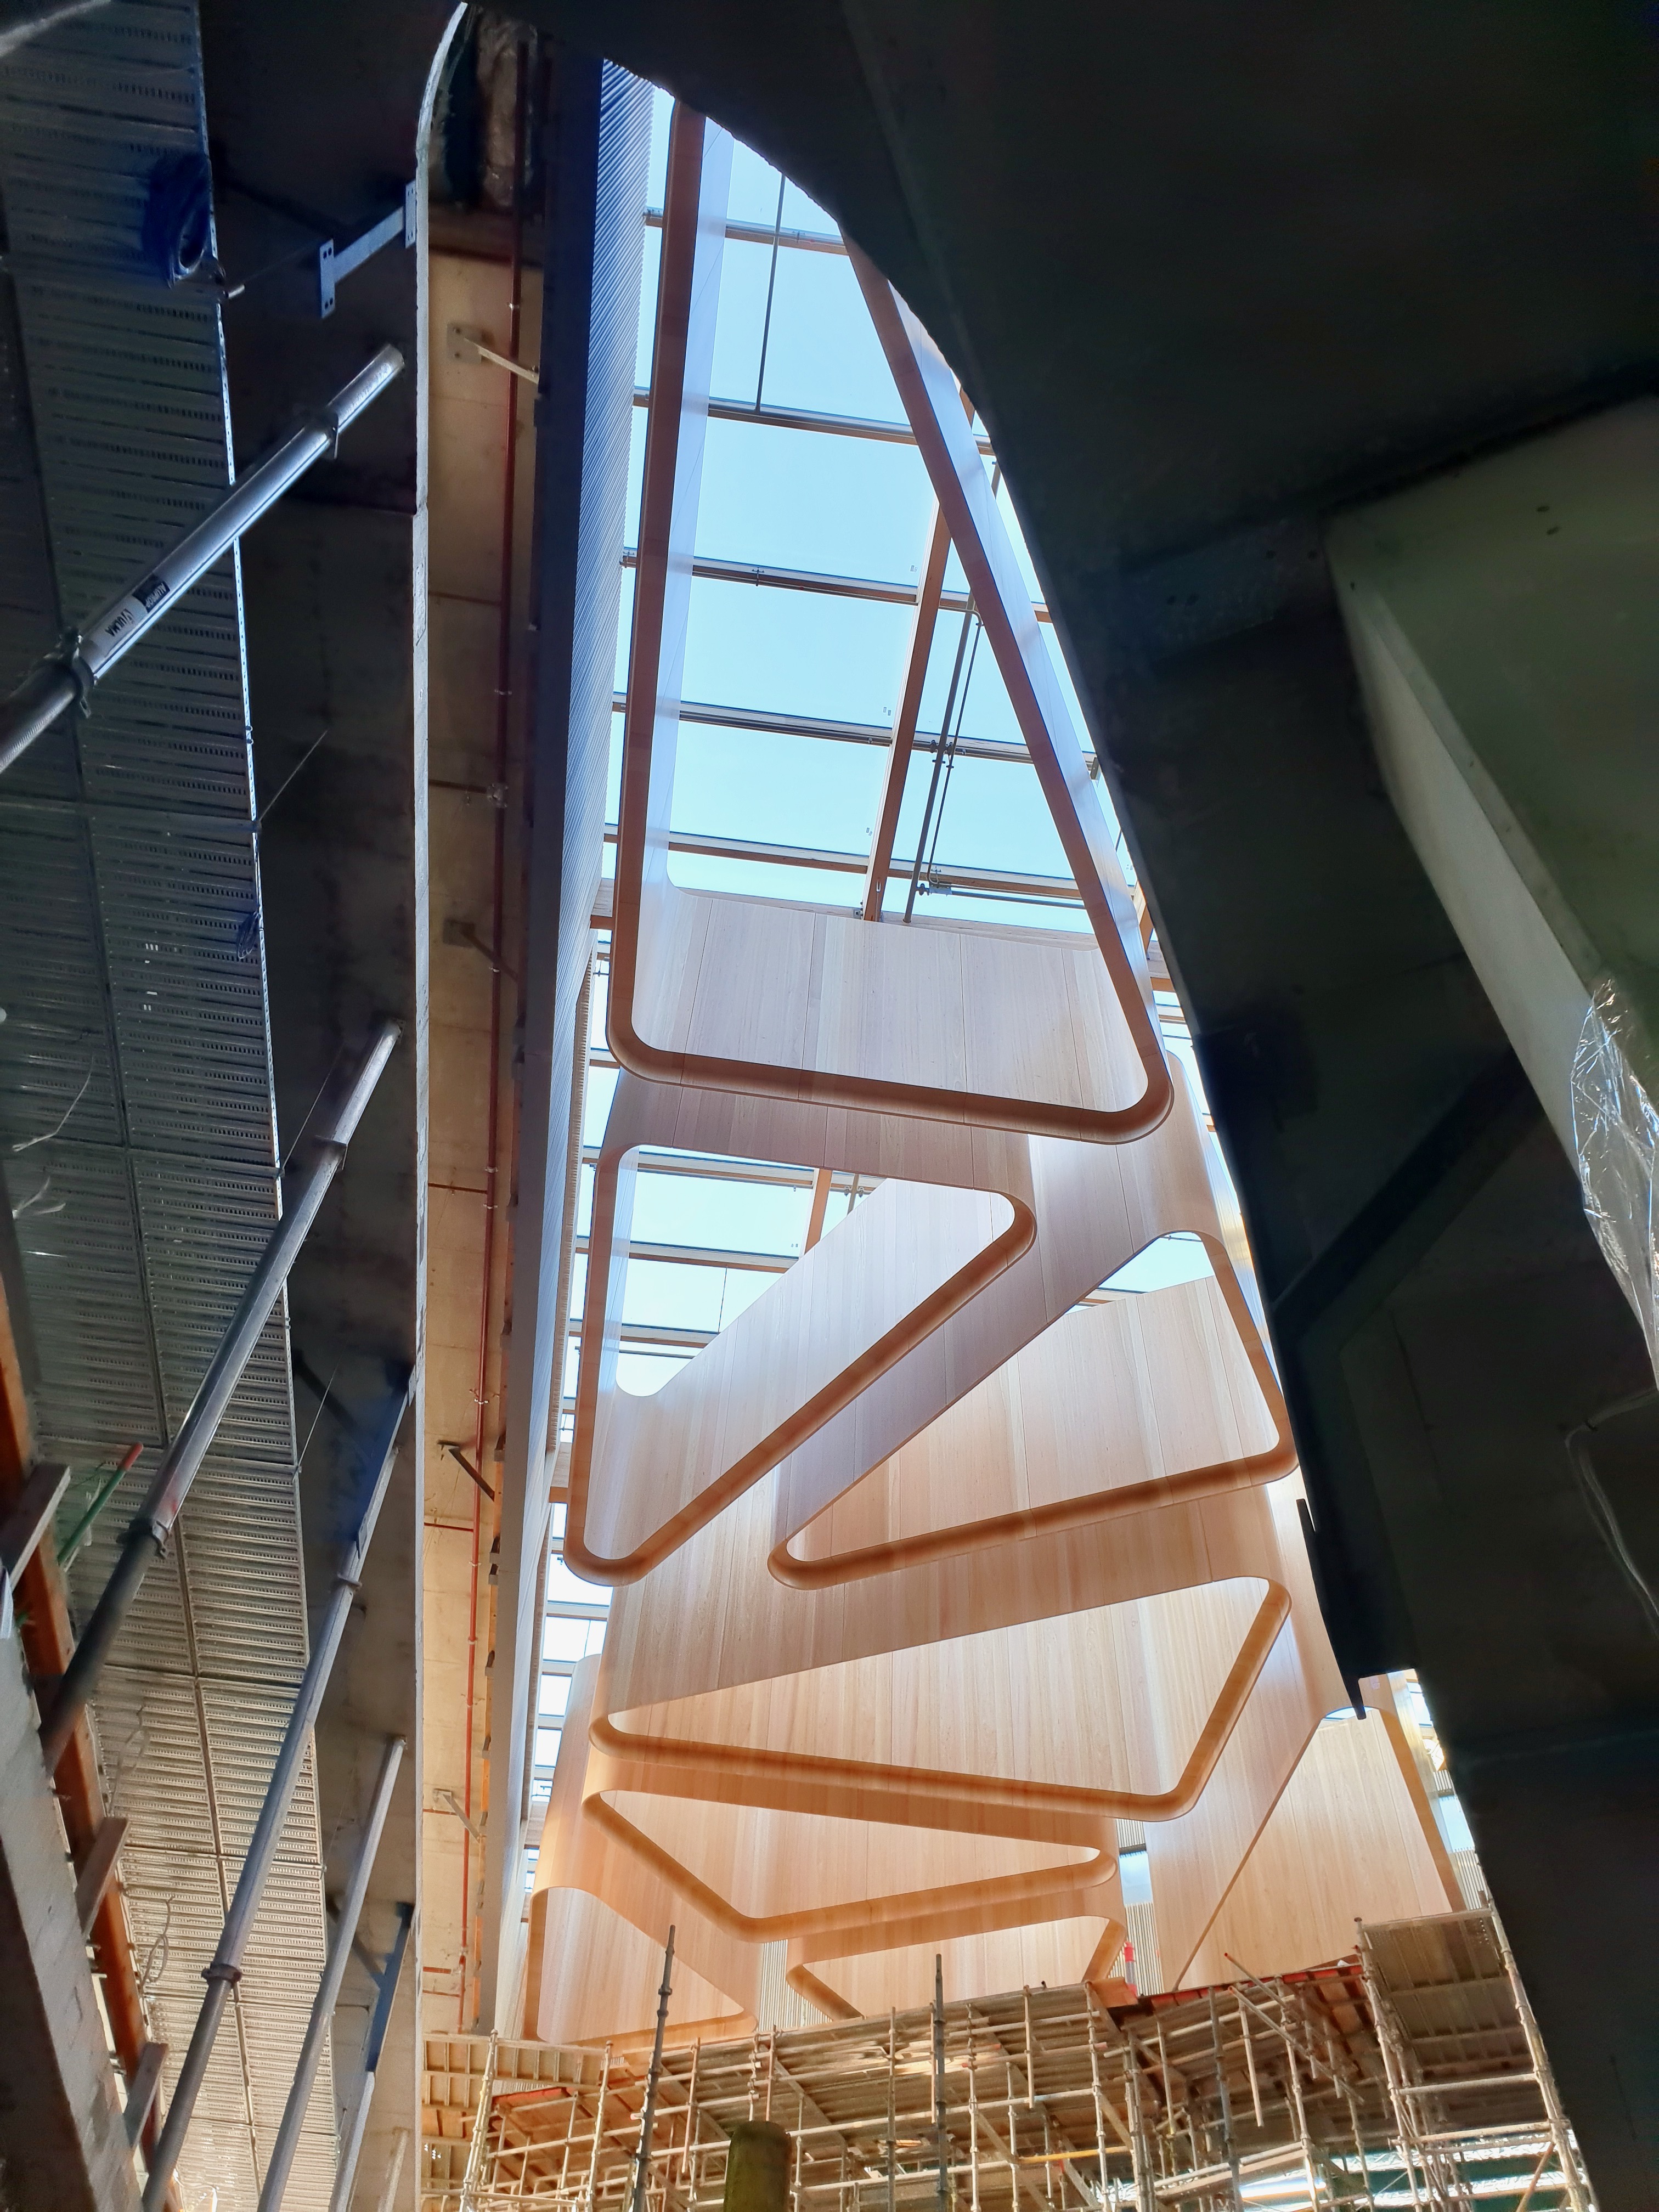 Tasmanian timber is featured in the central atrium